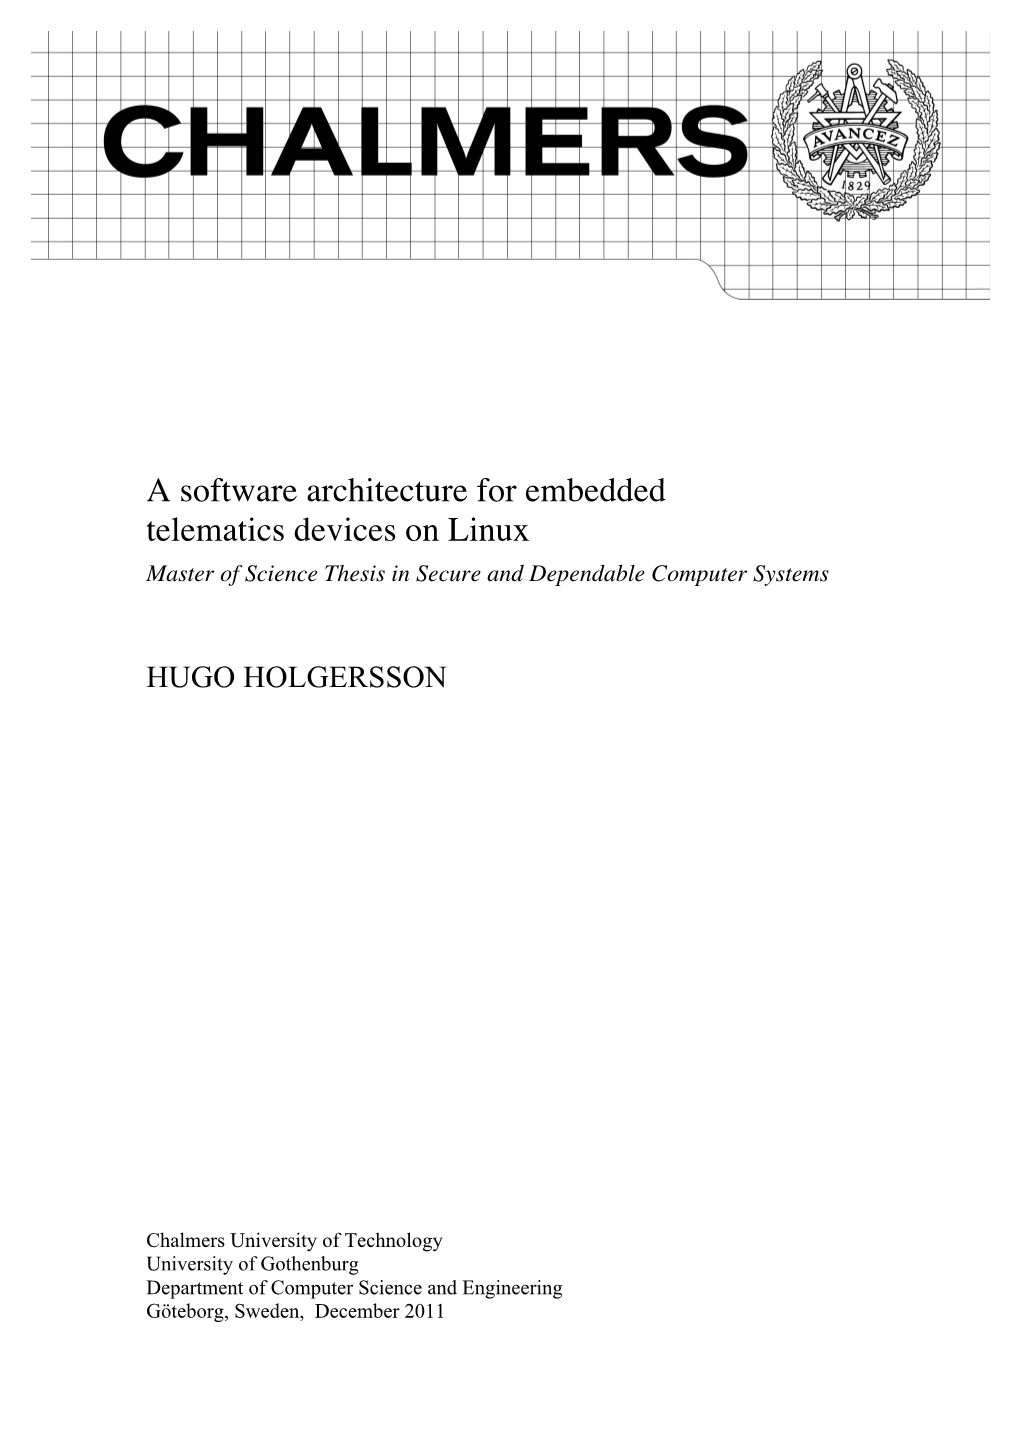 A Software Architecture for Embedded Telematics Devices on Linux Master of Science Thesis in Secure and Dependable Computer Systems